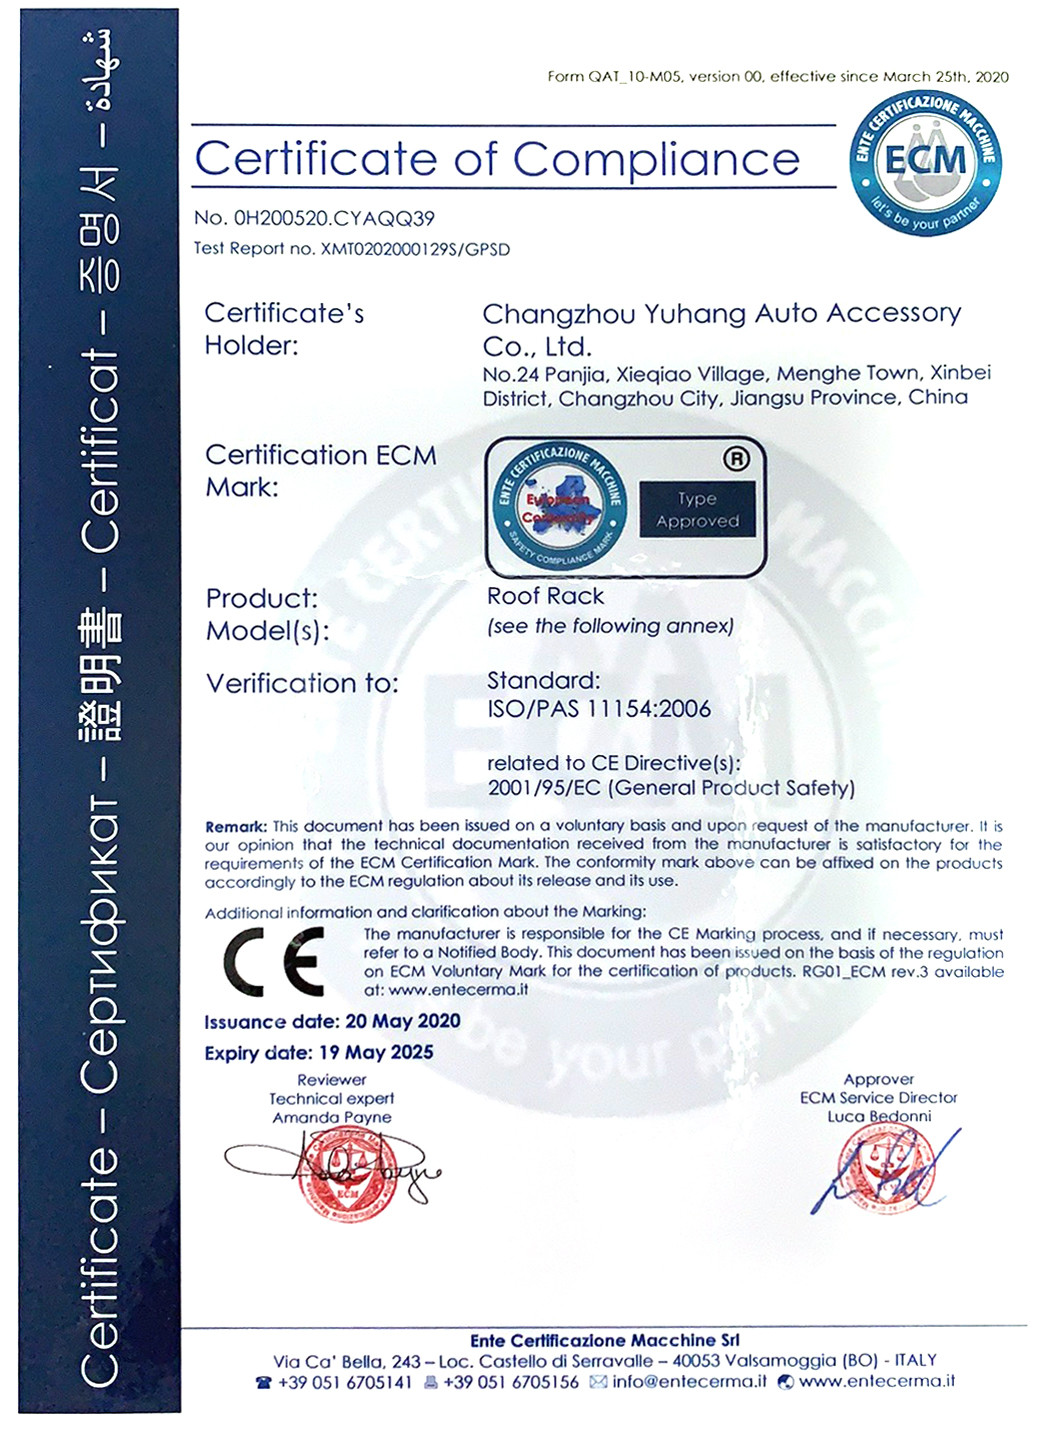 Chine Changzhou Yuhang Auto Accessary Co., Ltd. Certifications